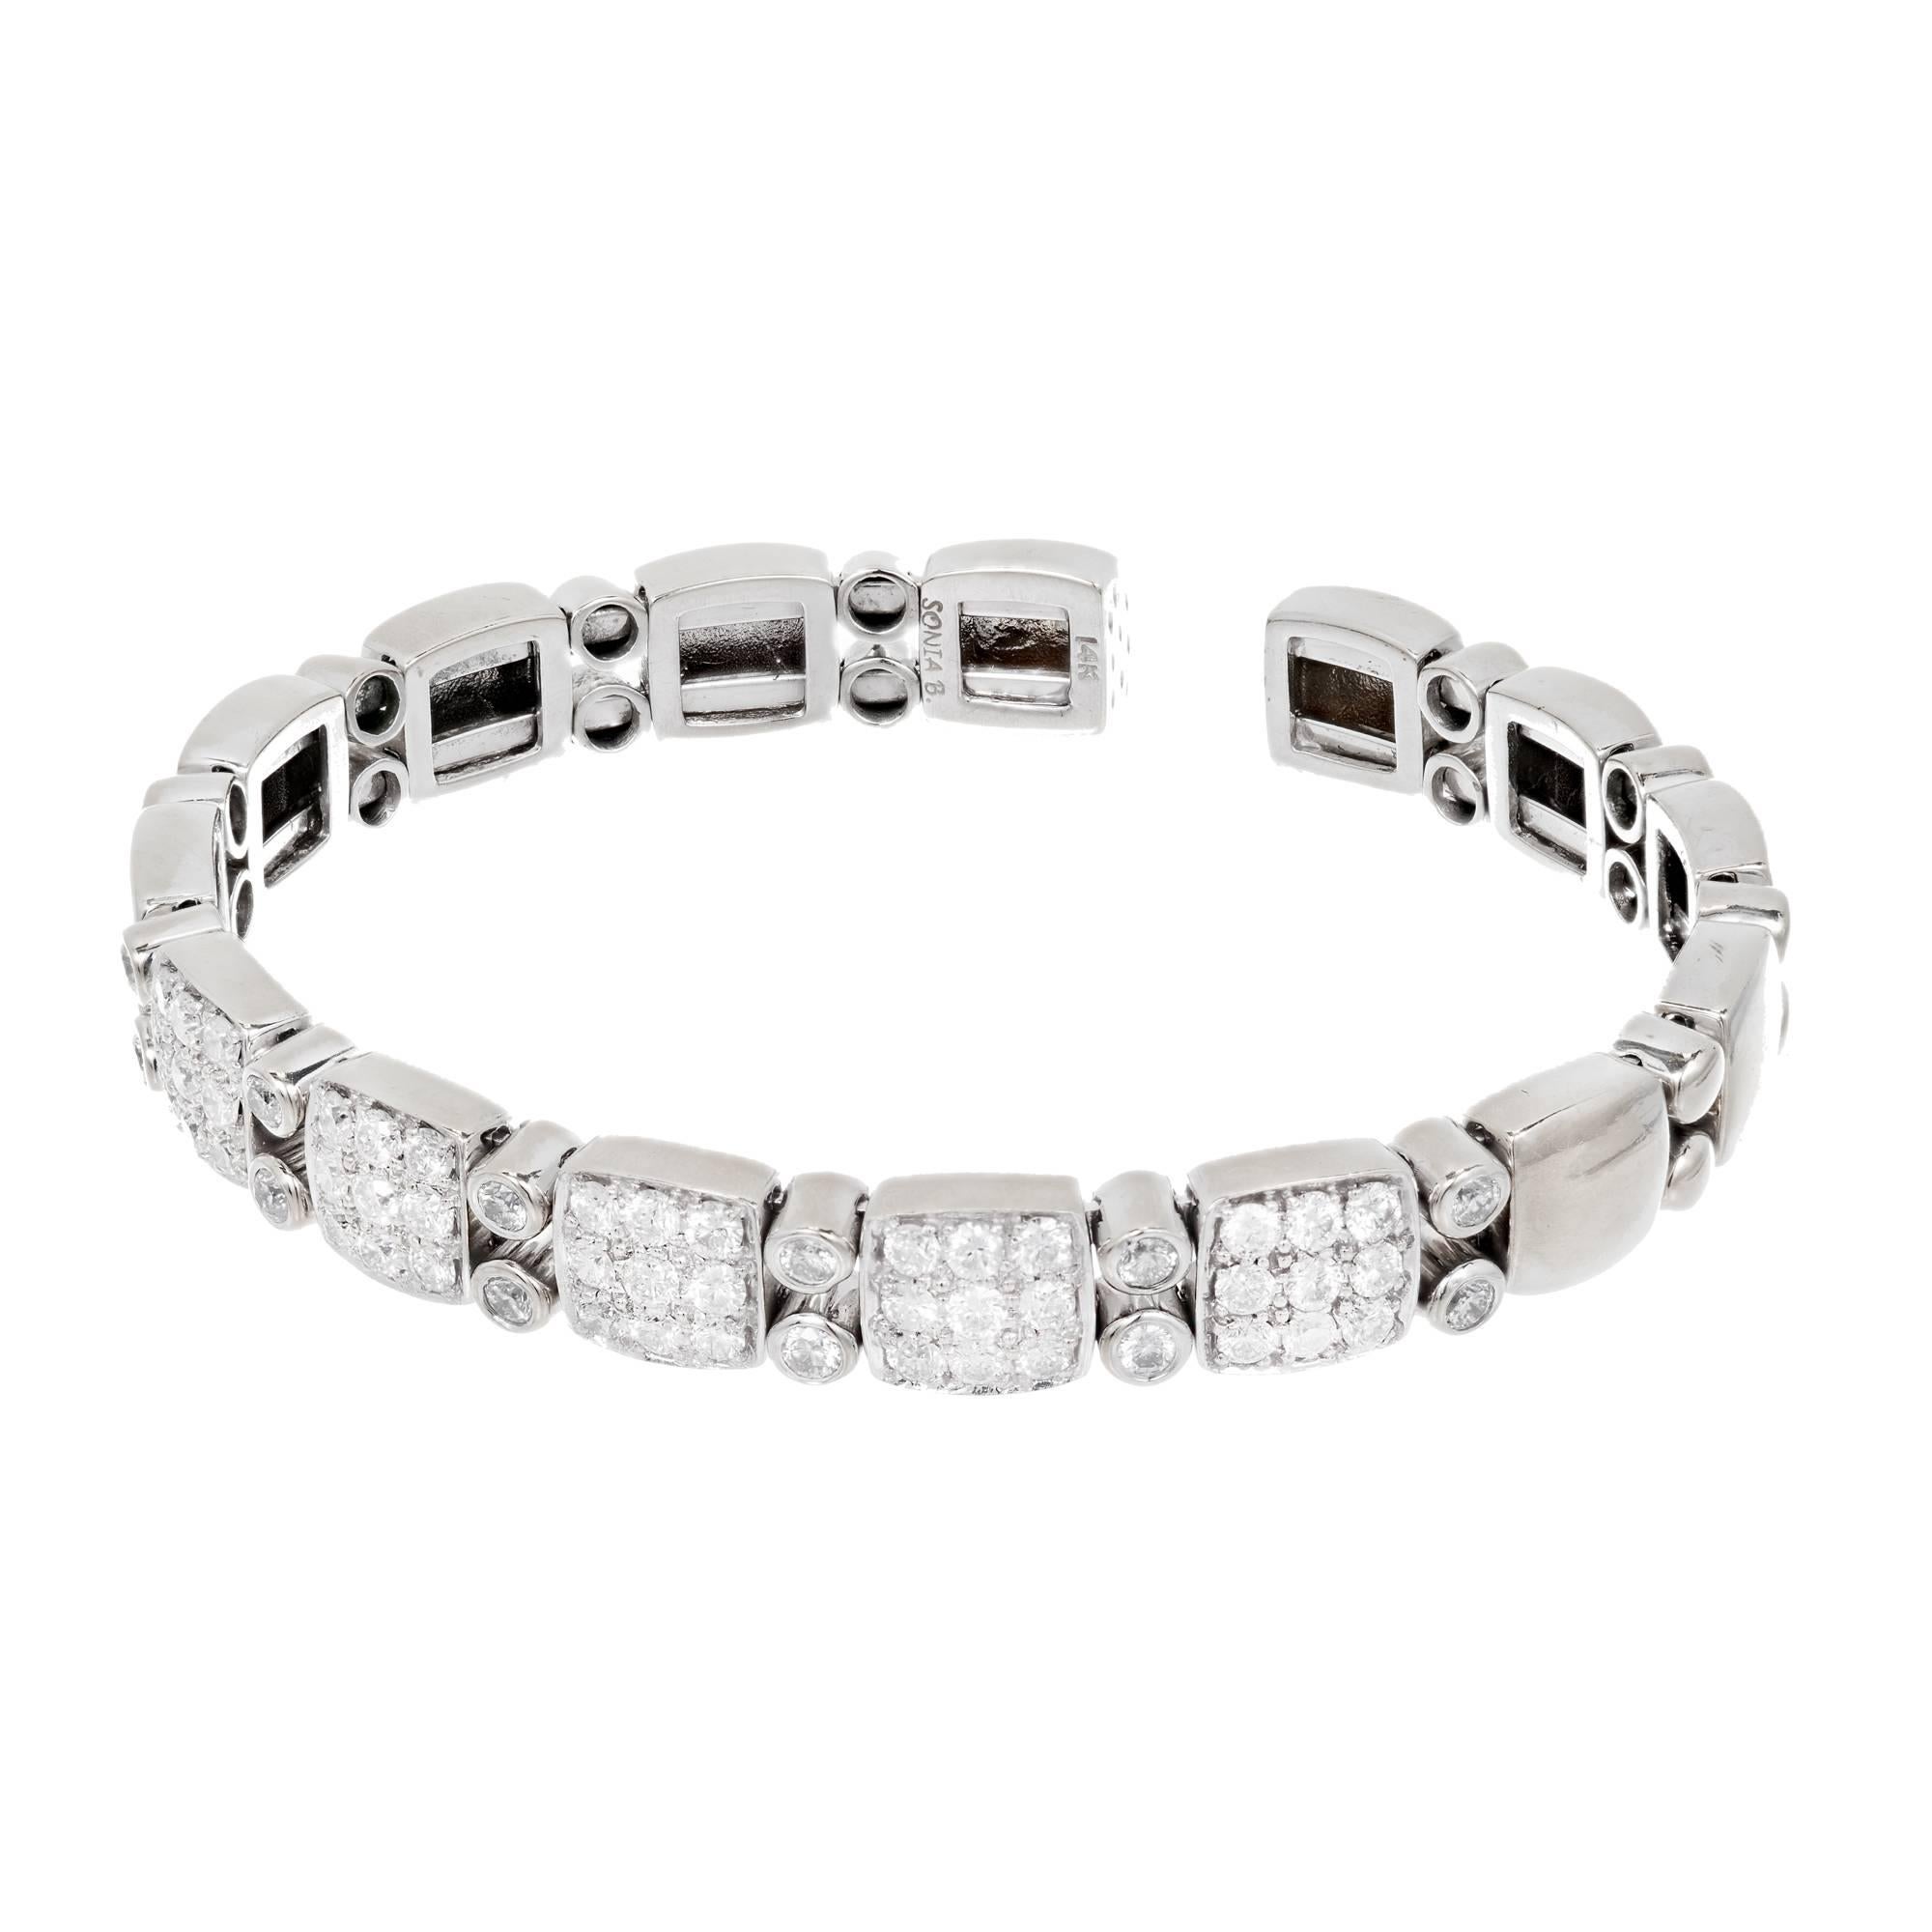 Sonia B solid 14k white gold flex bangle bracelet with fine white sparkly diamonds.

57 round full cut diamonds approx. total weight 1.70cts, H, VS1 to SI1
29.3 grams
14k White Gold
Stamped: 14k Sonia B
Open bottom and oval shape
Width: 3/ inch or